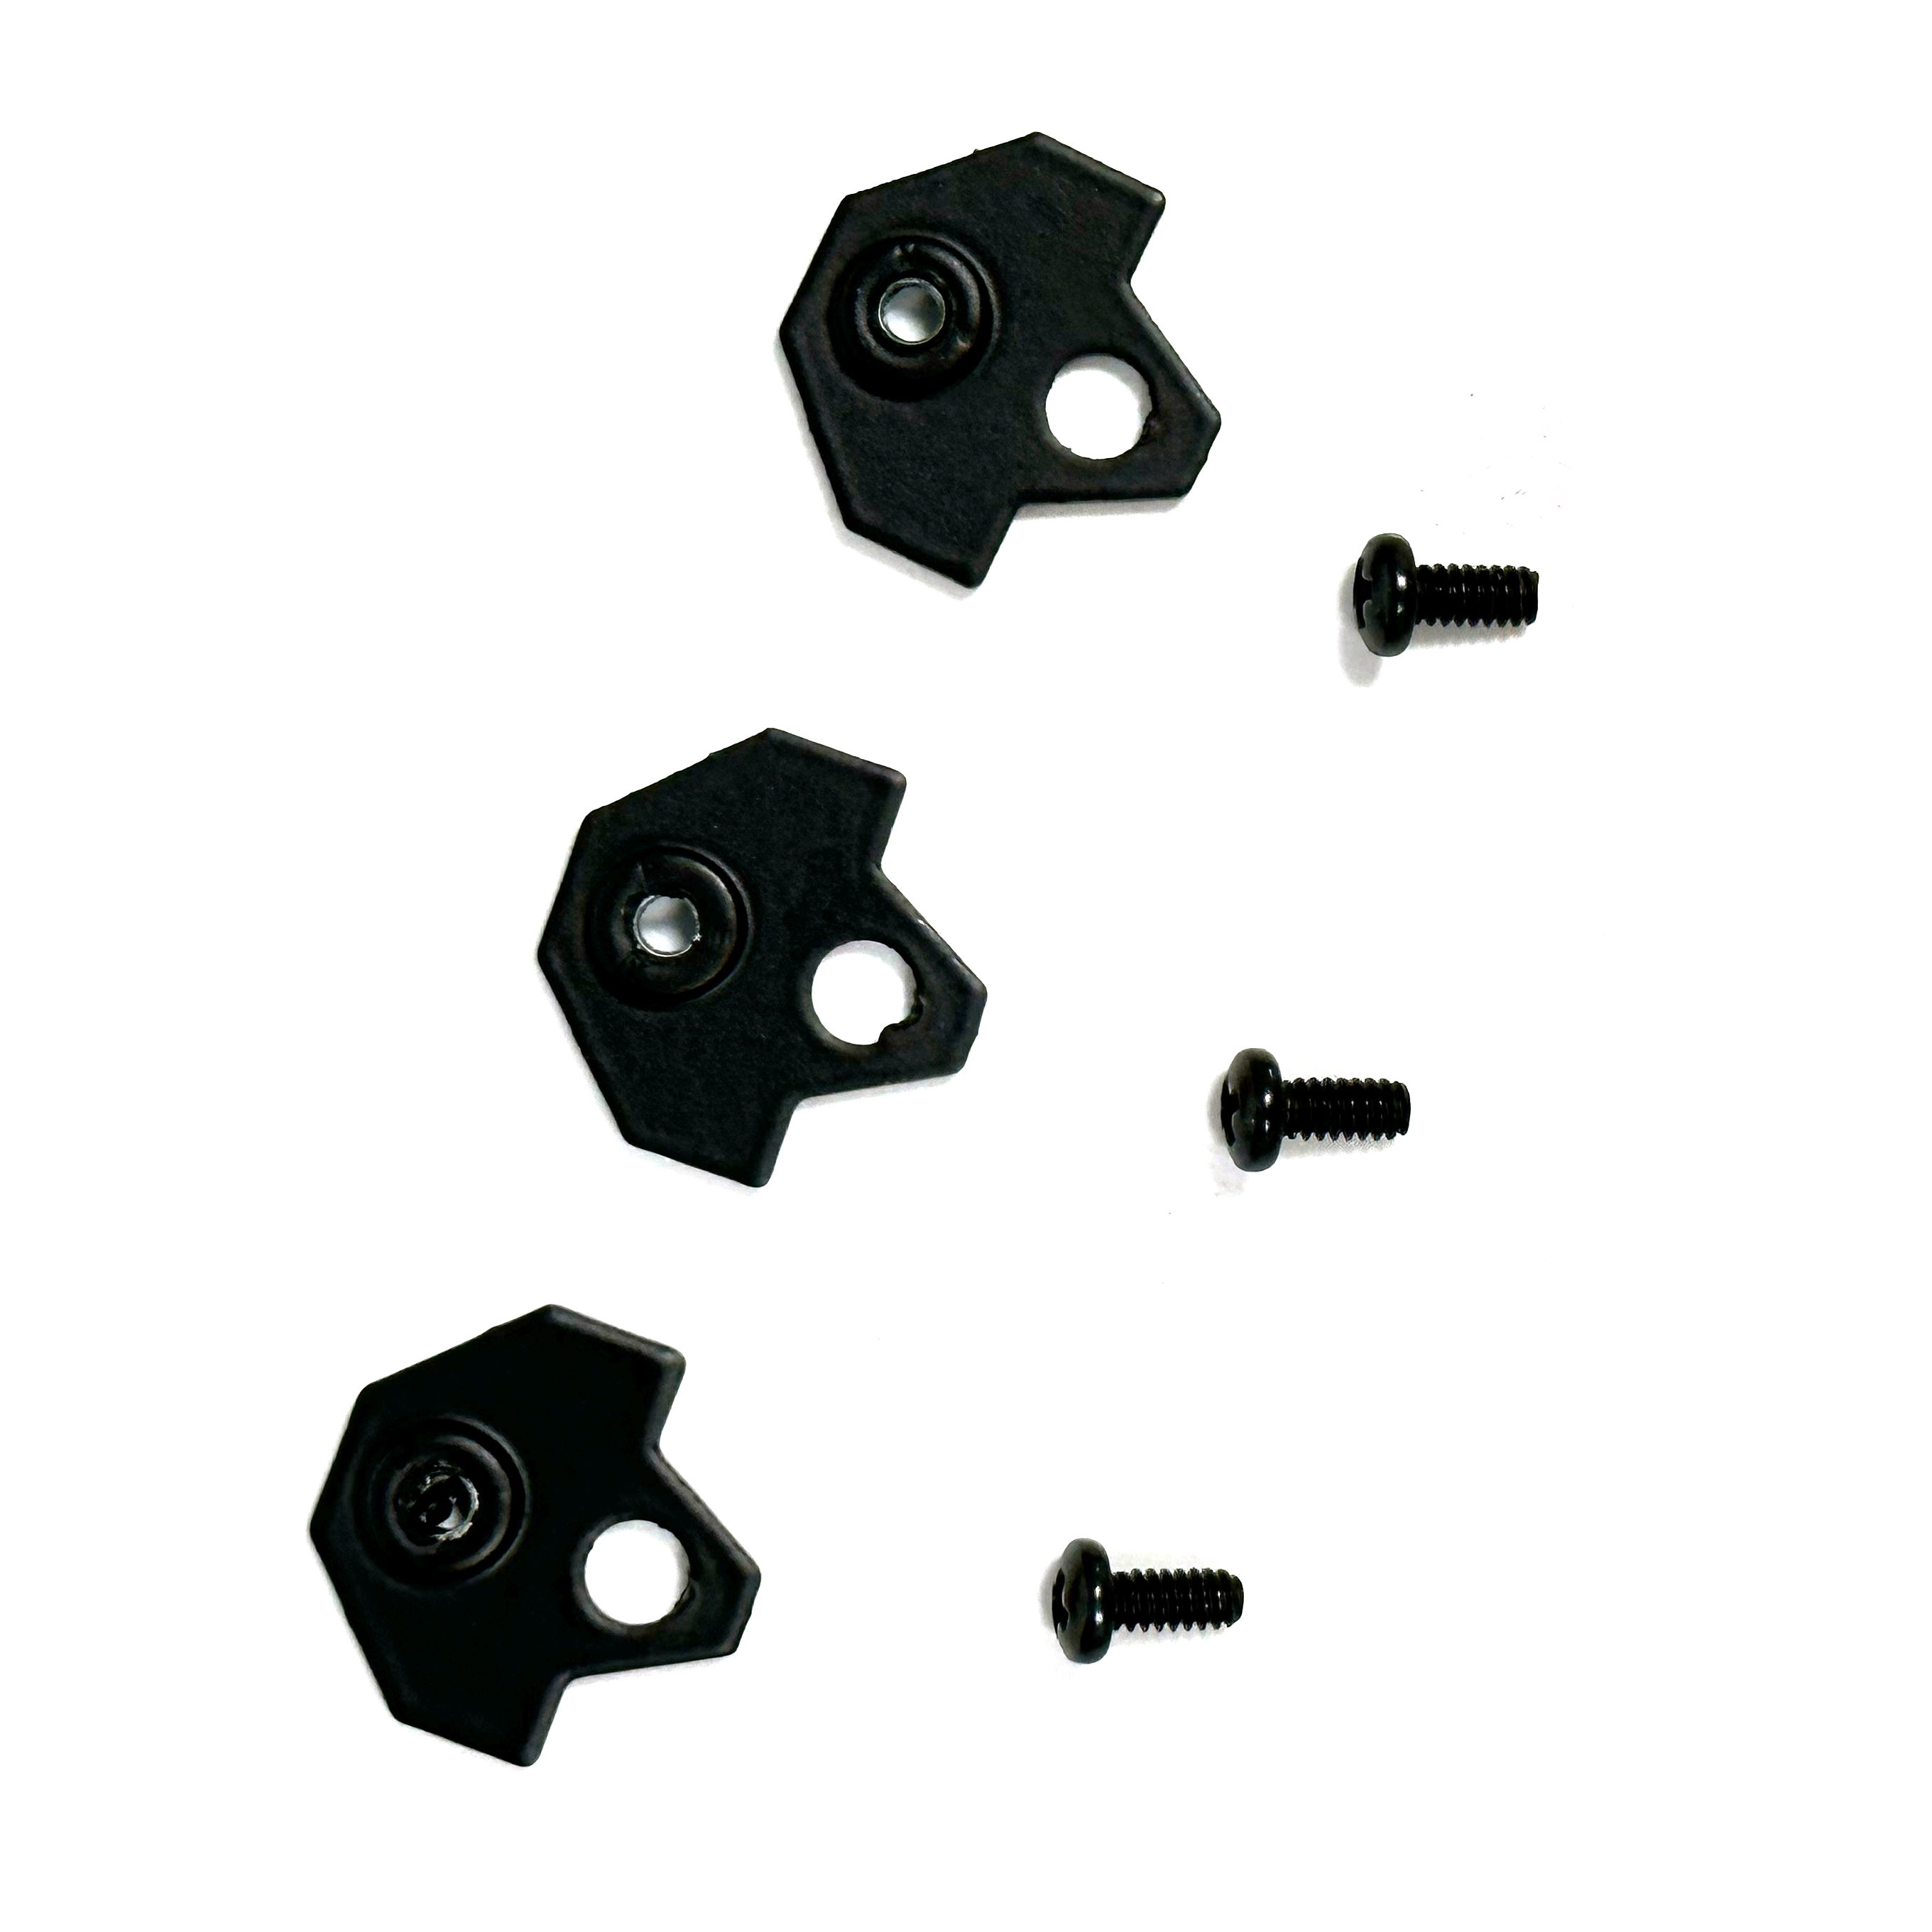 27880001 MAC Aura PXL Mount Kit, including 3 clips and 3 screws 